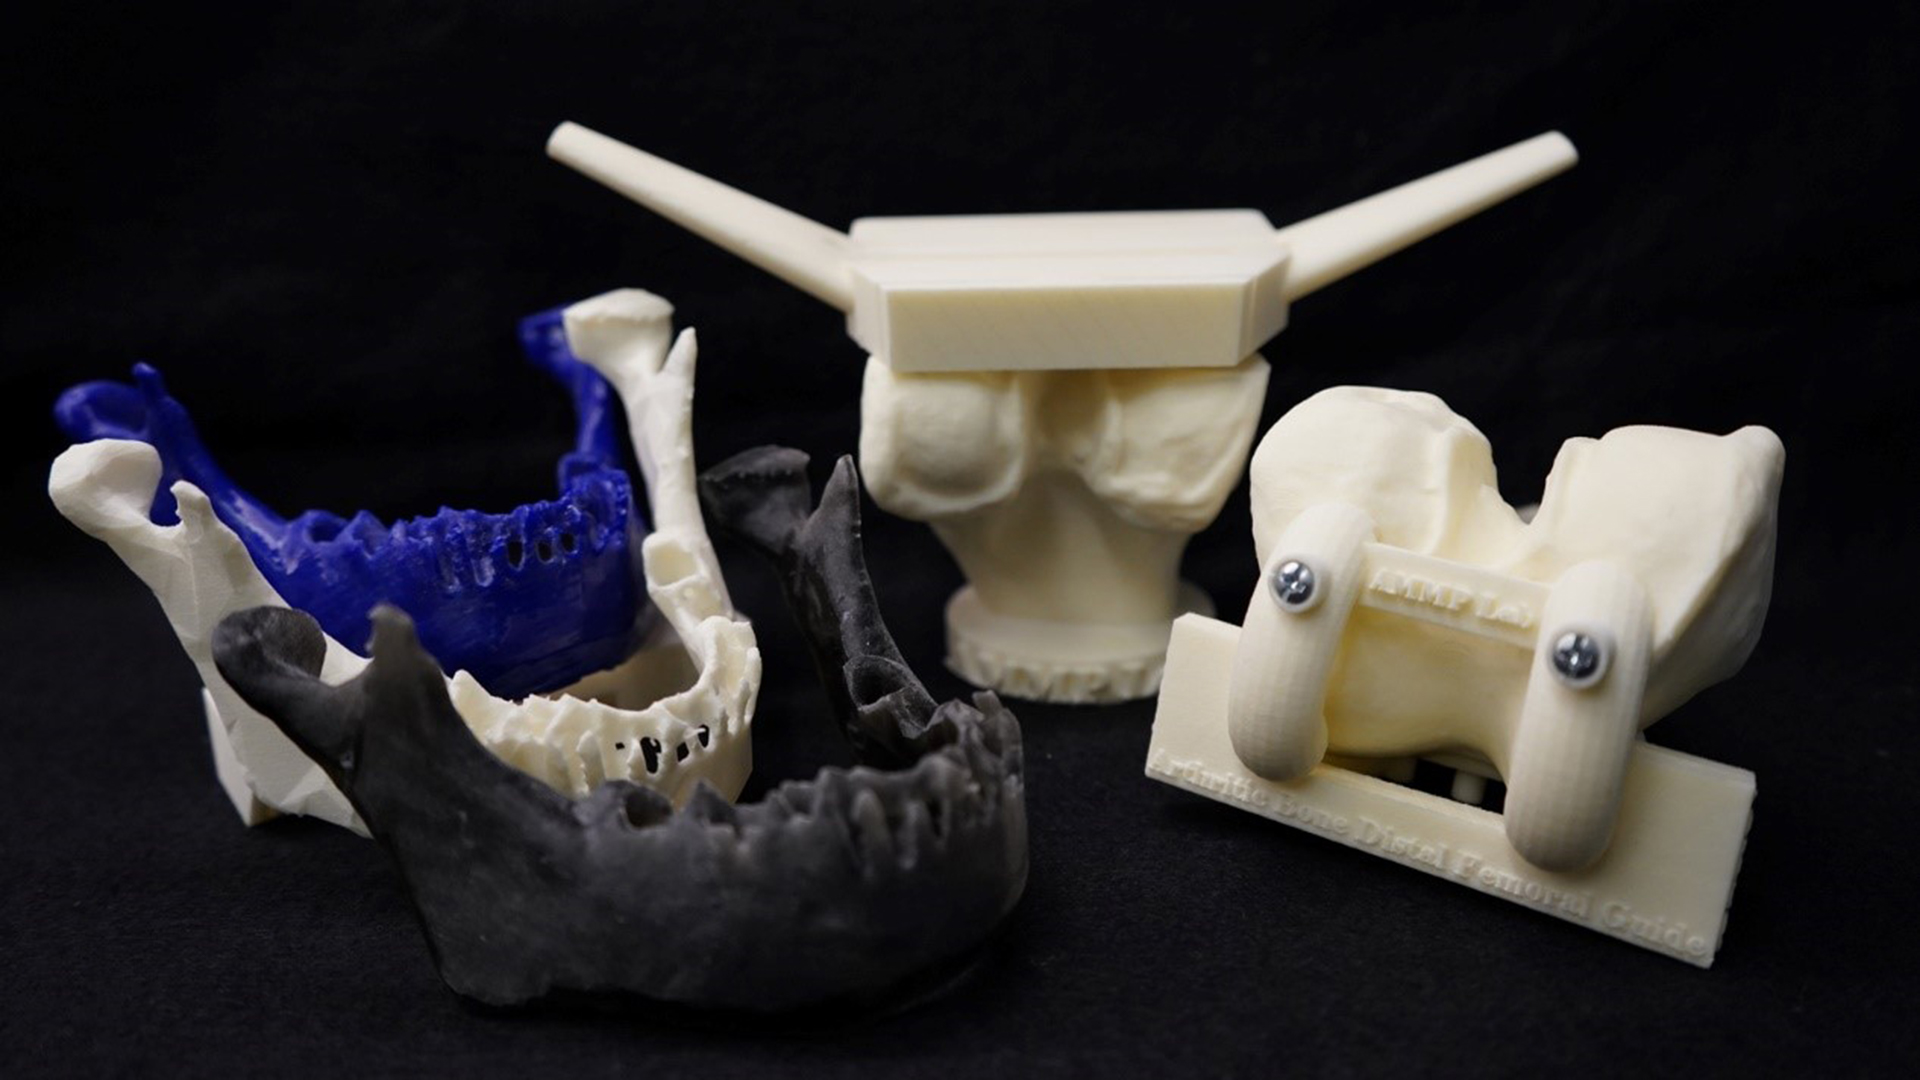 3D Printed Medical Device